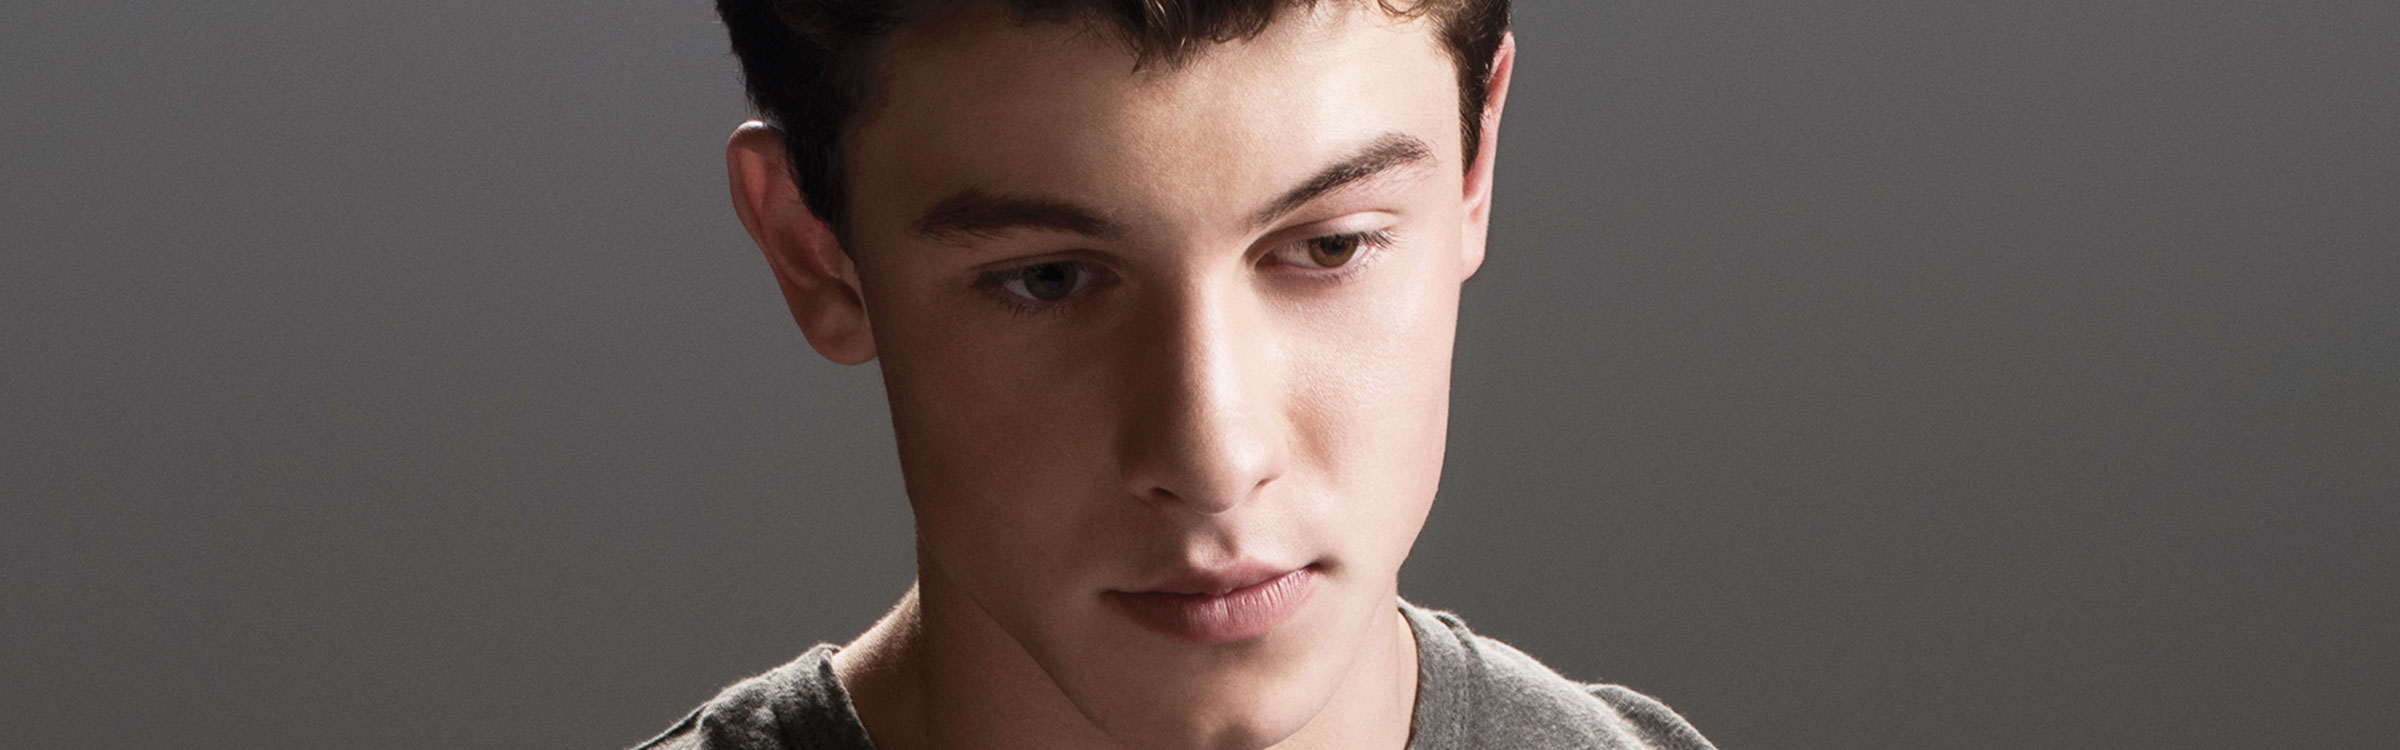 2400x750 20s shawnmendes